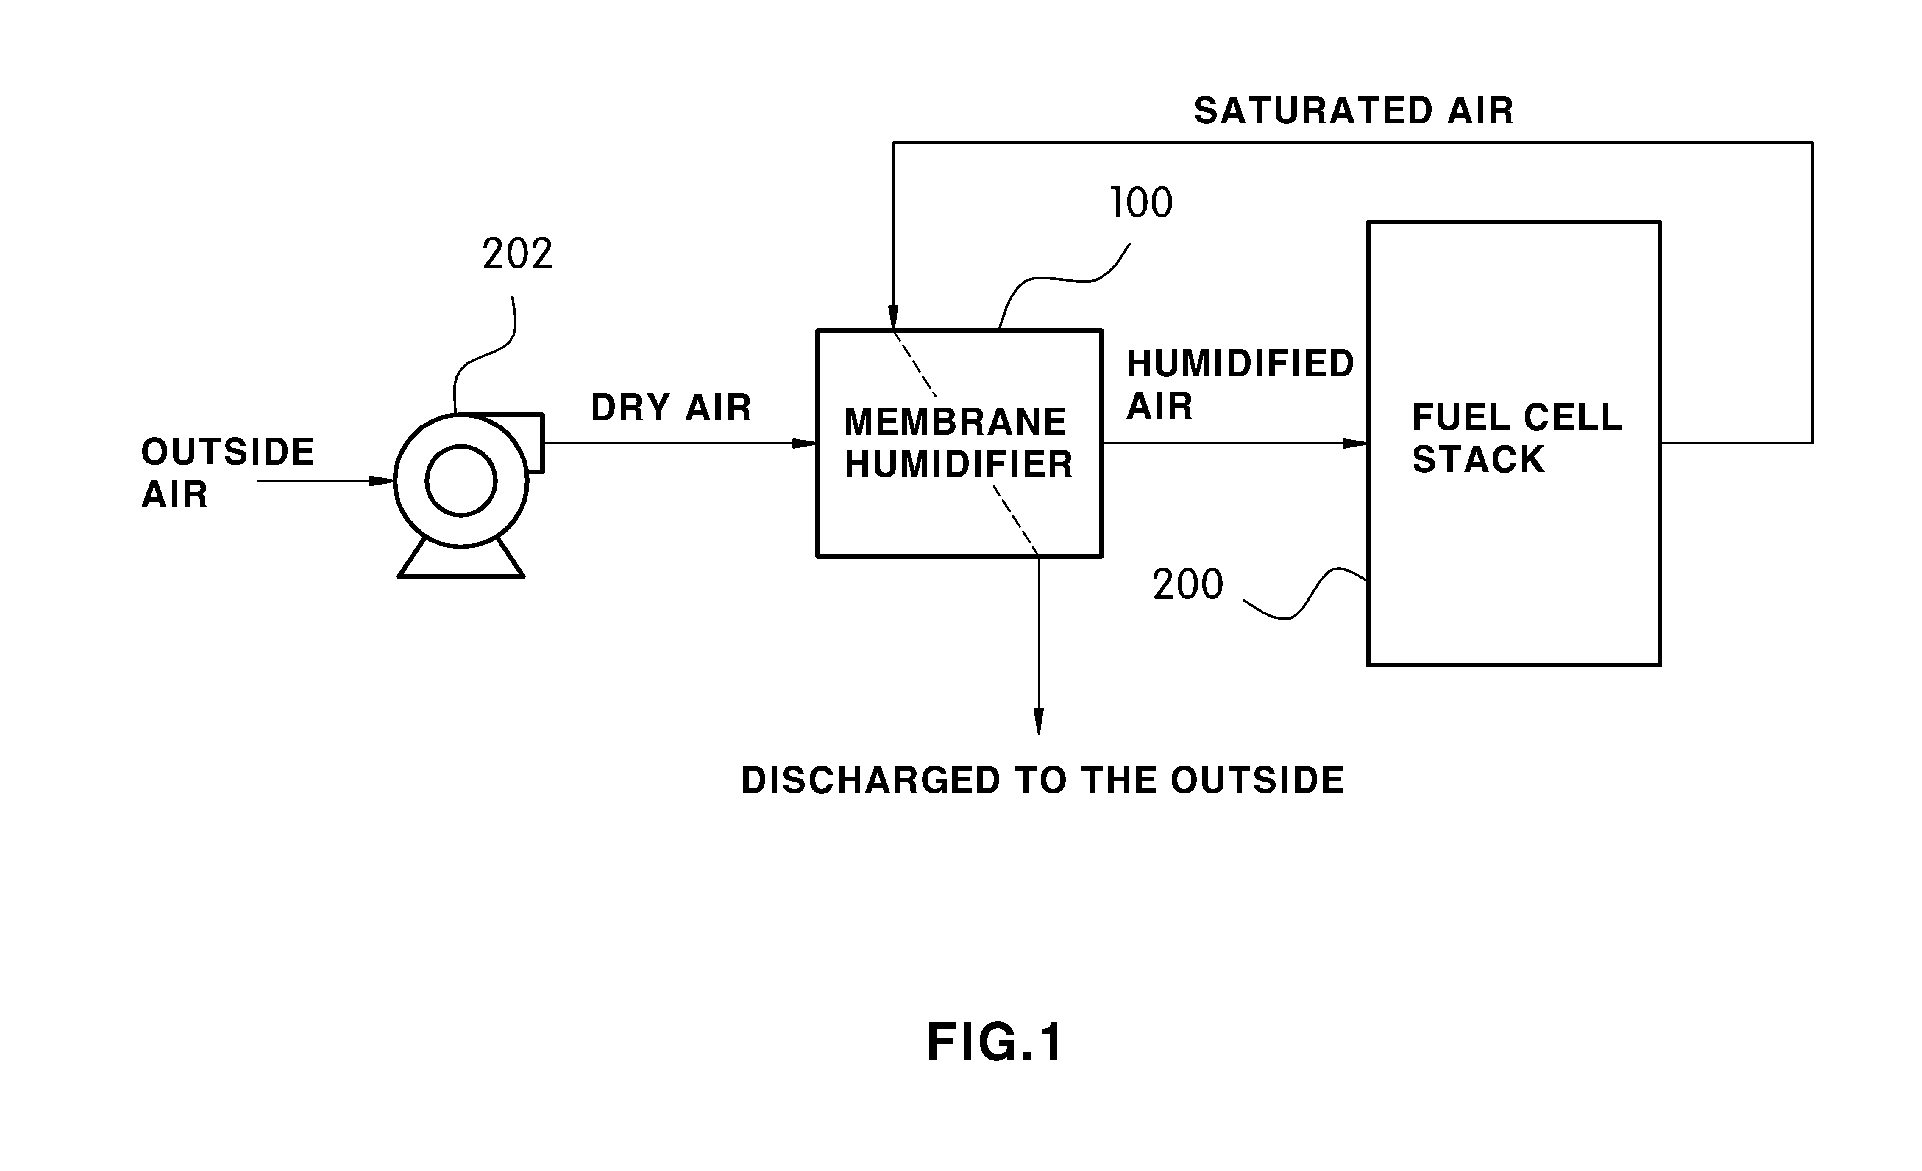 Humidifier for fuel cell